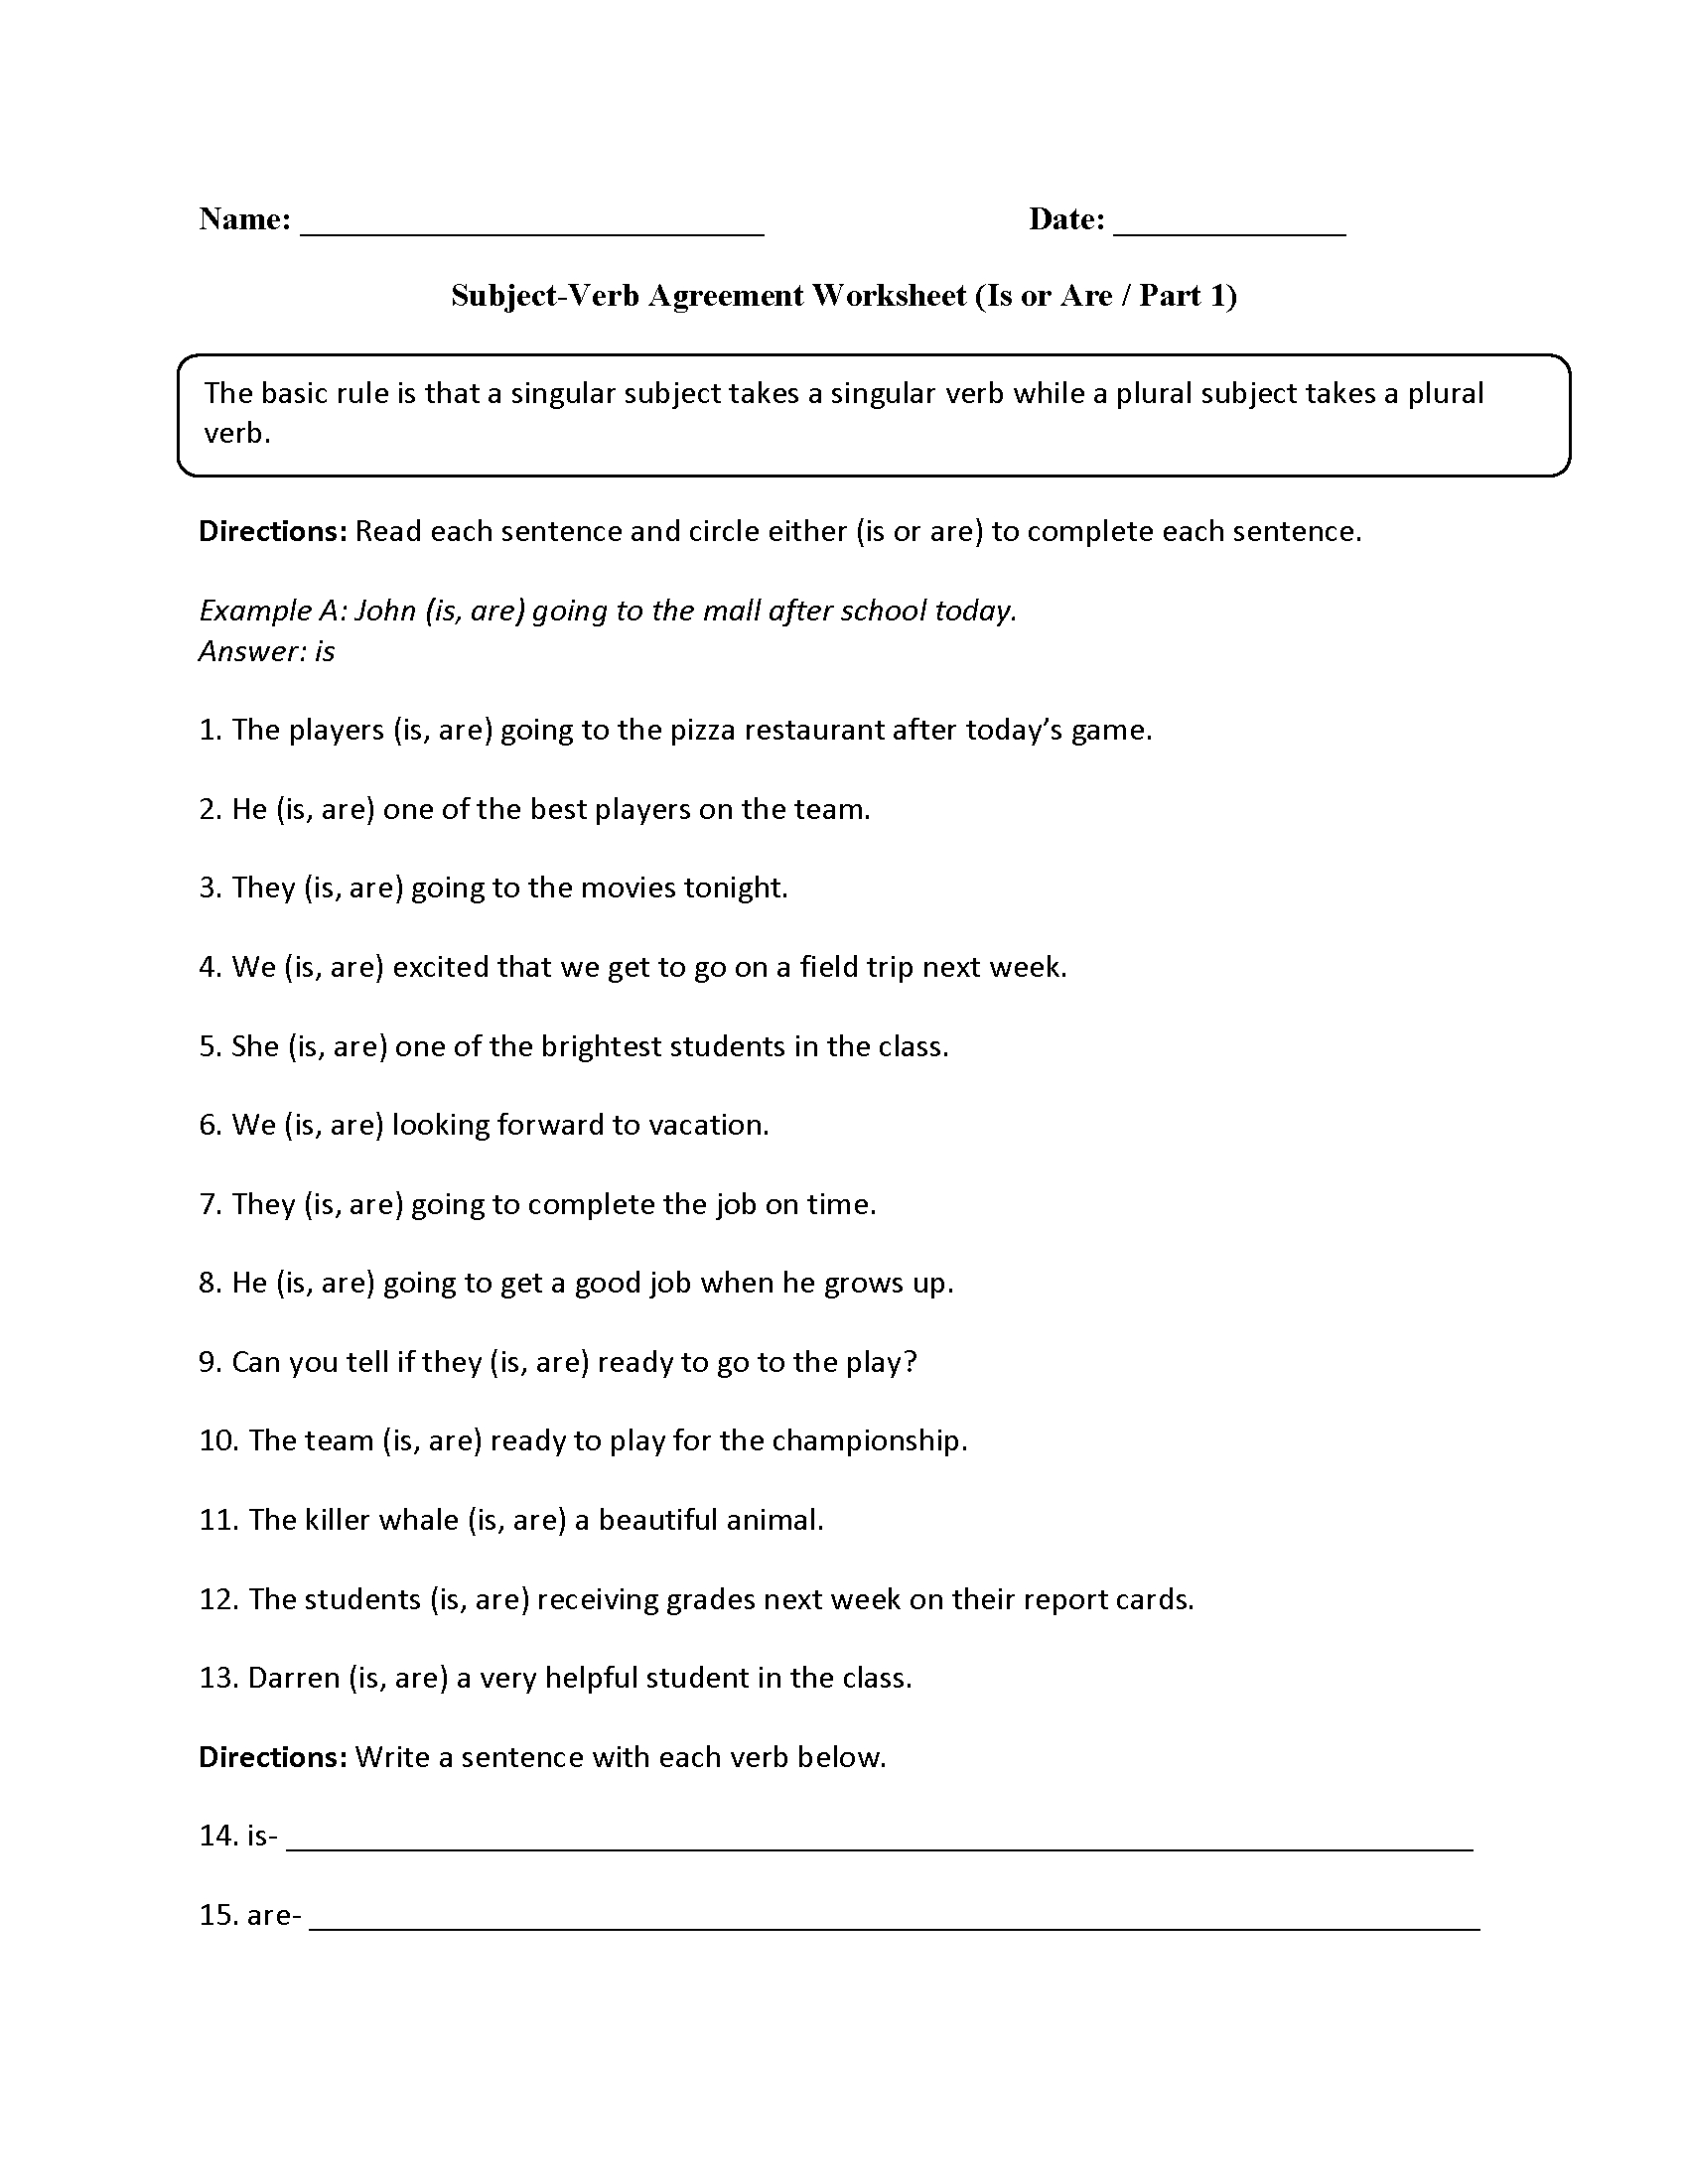 Subject Of Verb Agreement Verbs Worksheets Subject Verb Agreement Worksheets